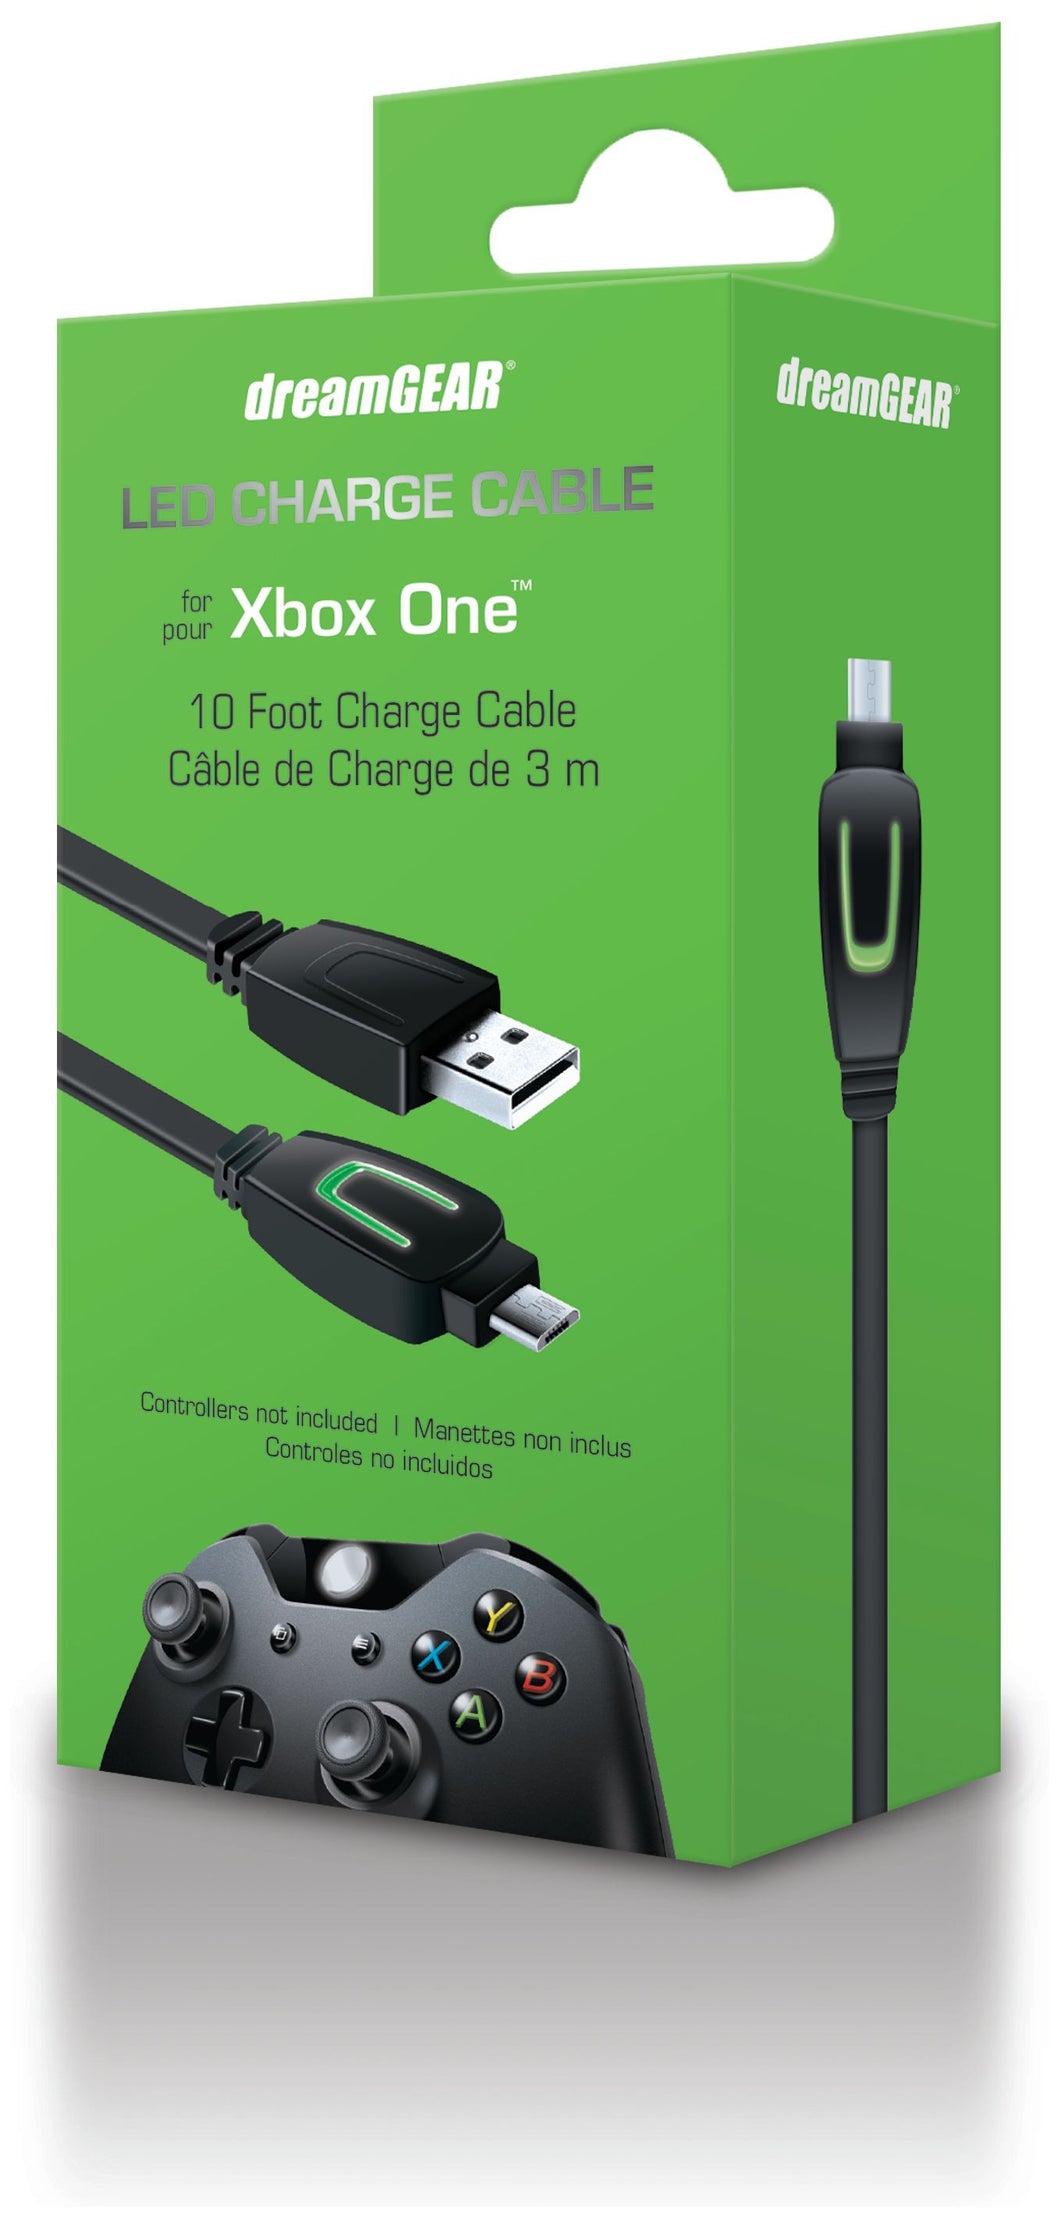 XB1 dreamGEAR LED Charge Cable - Black